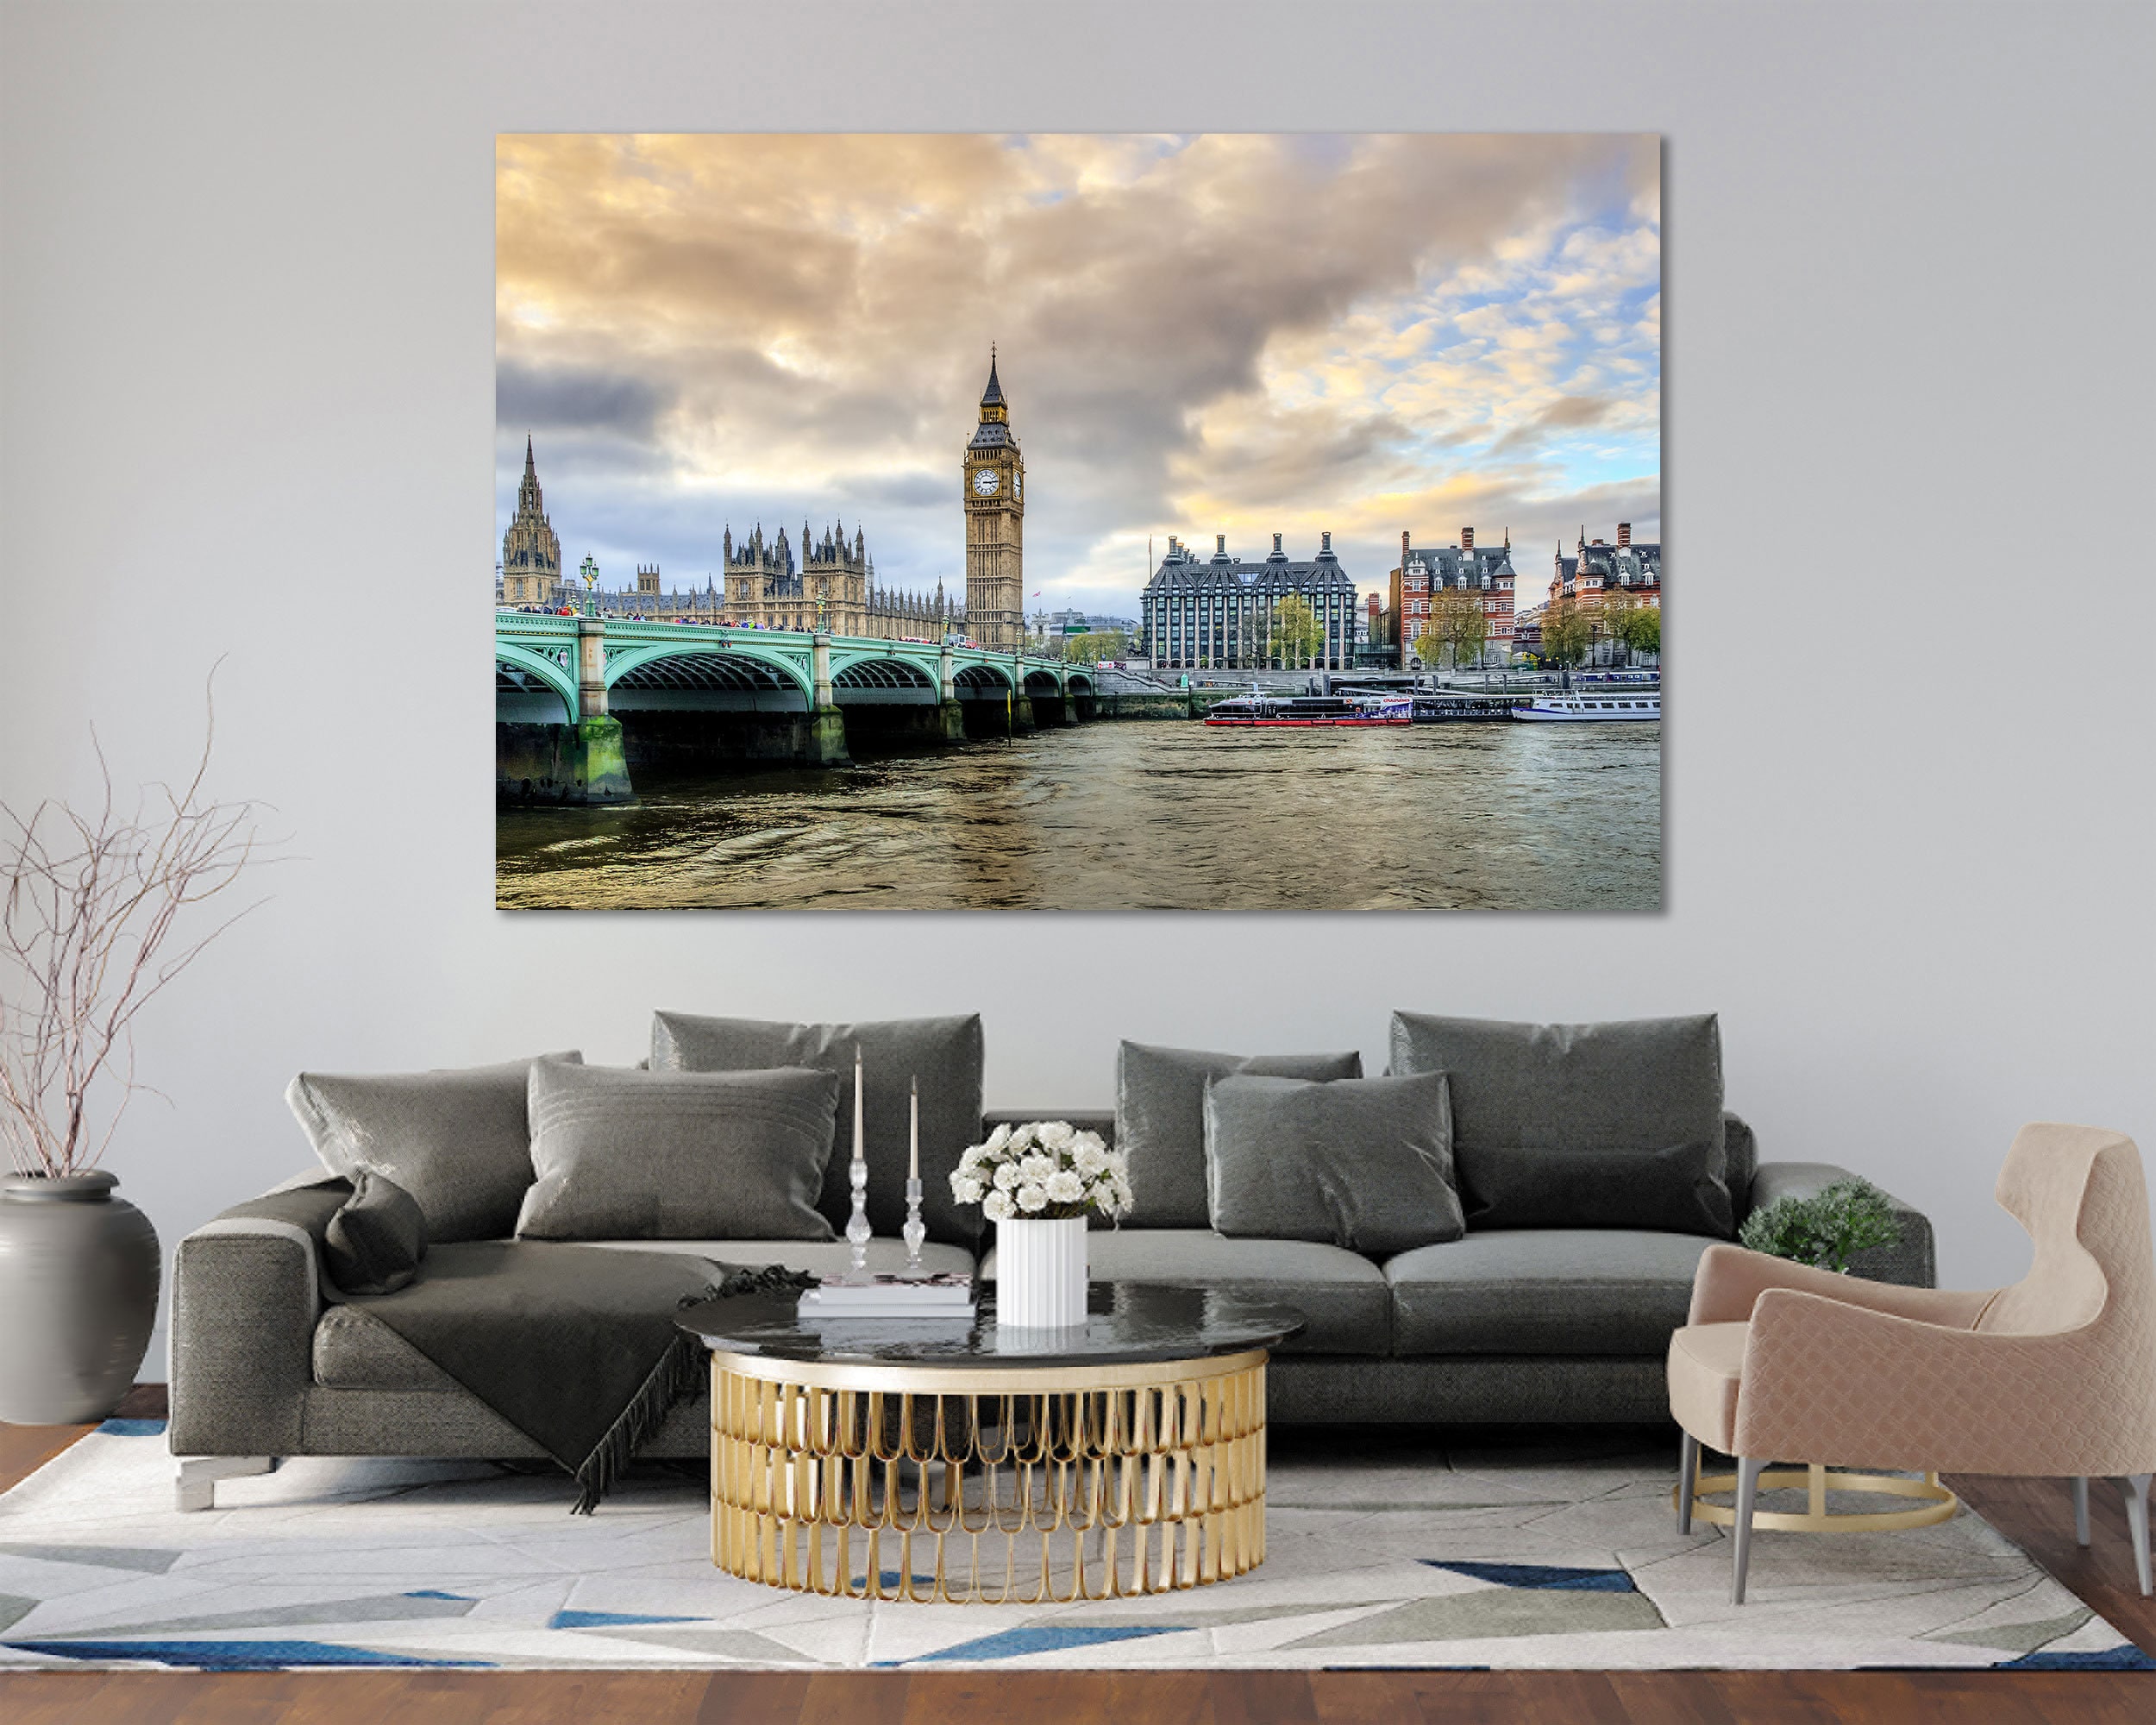 Awesome Big Ben in England Popular Travel Location in London | Etsy